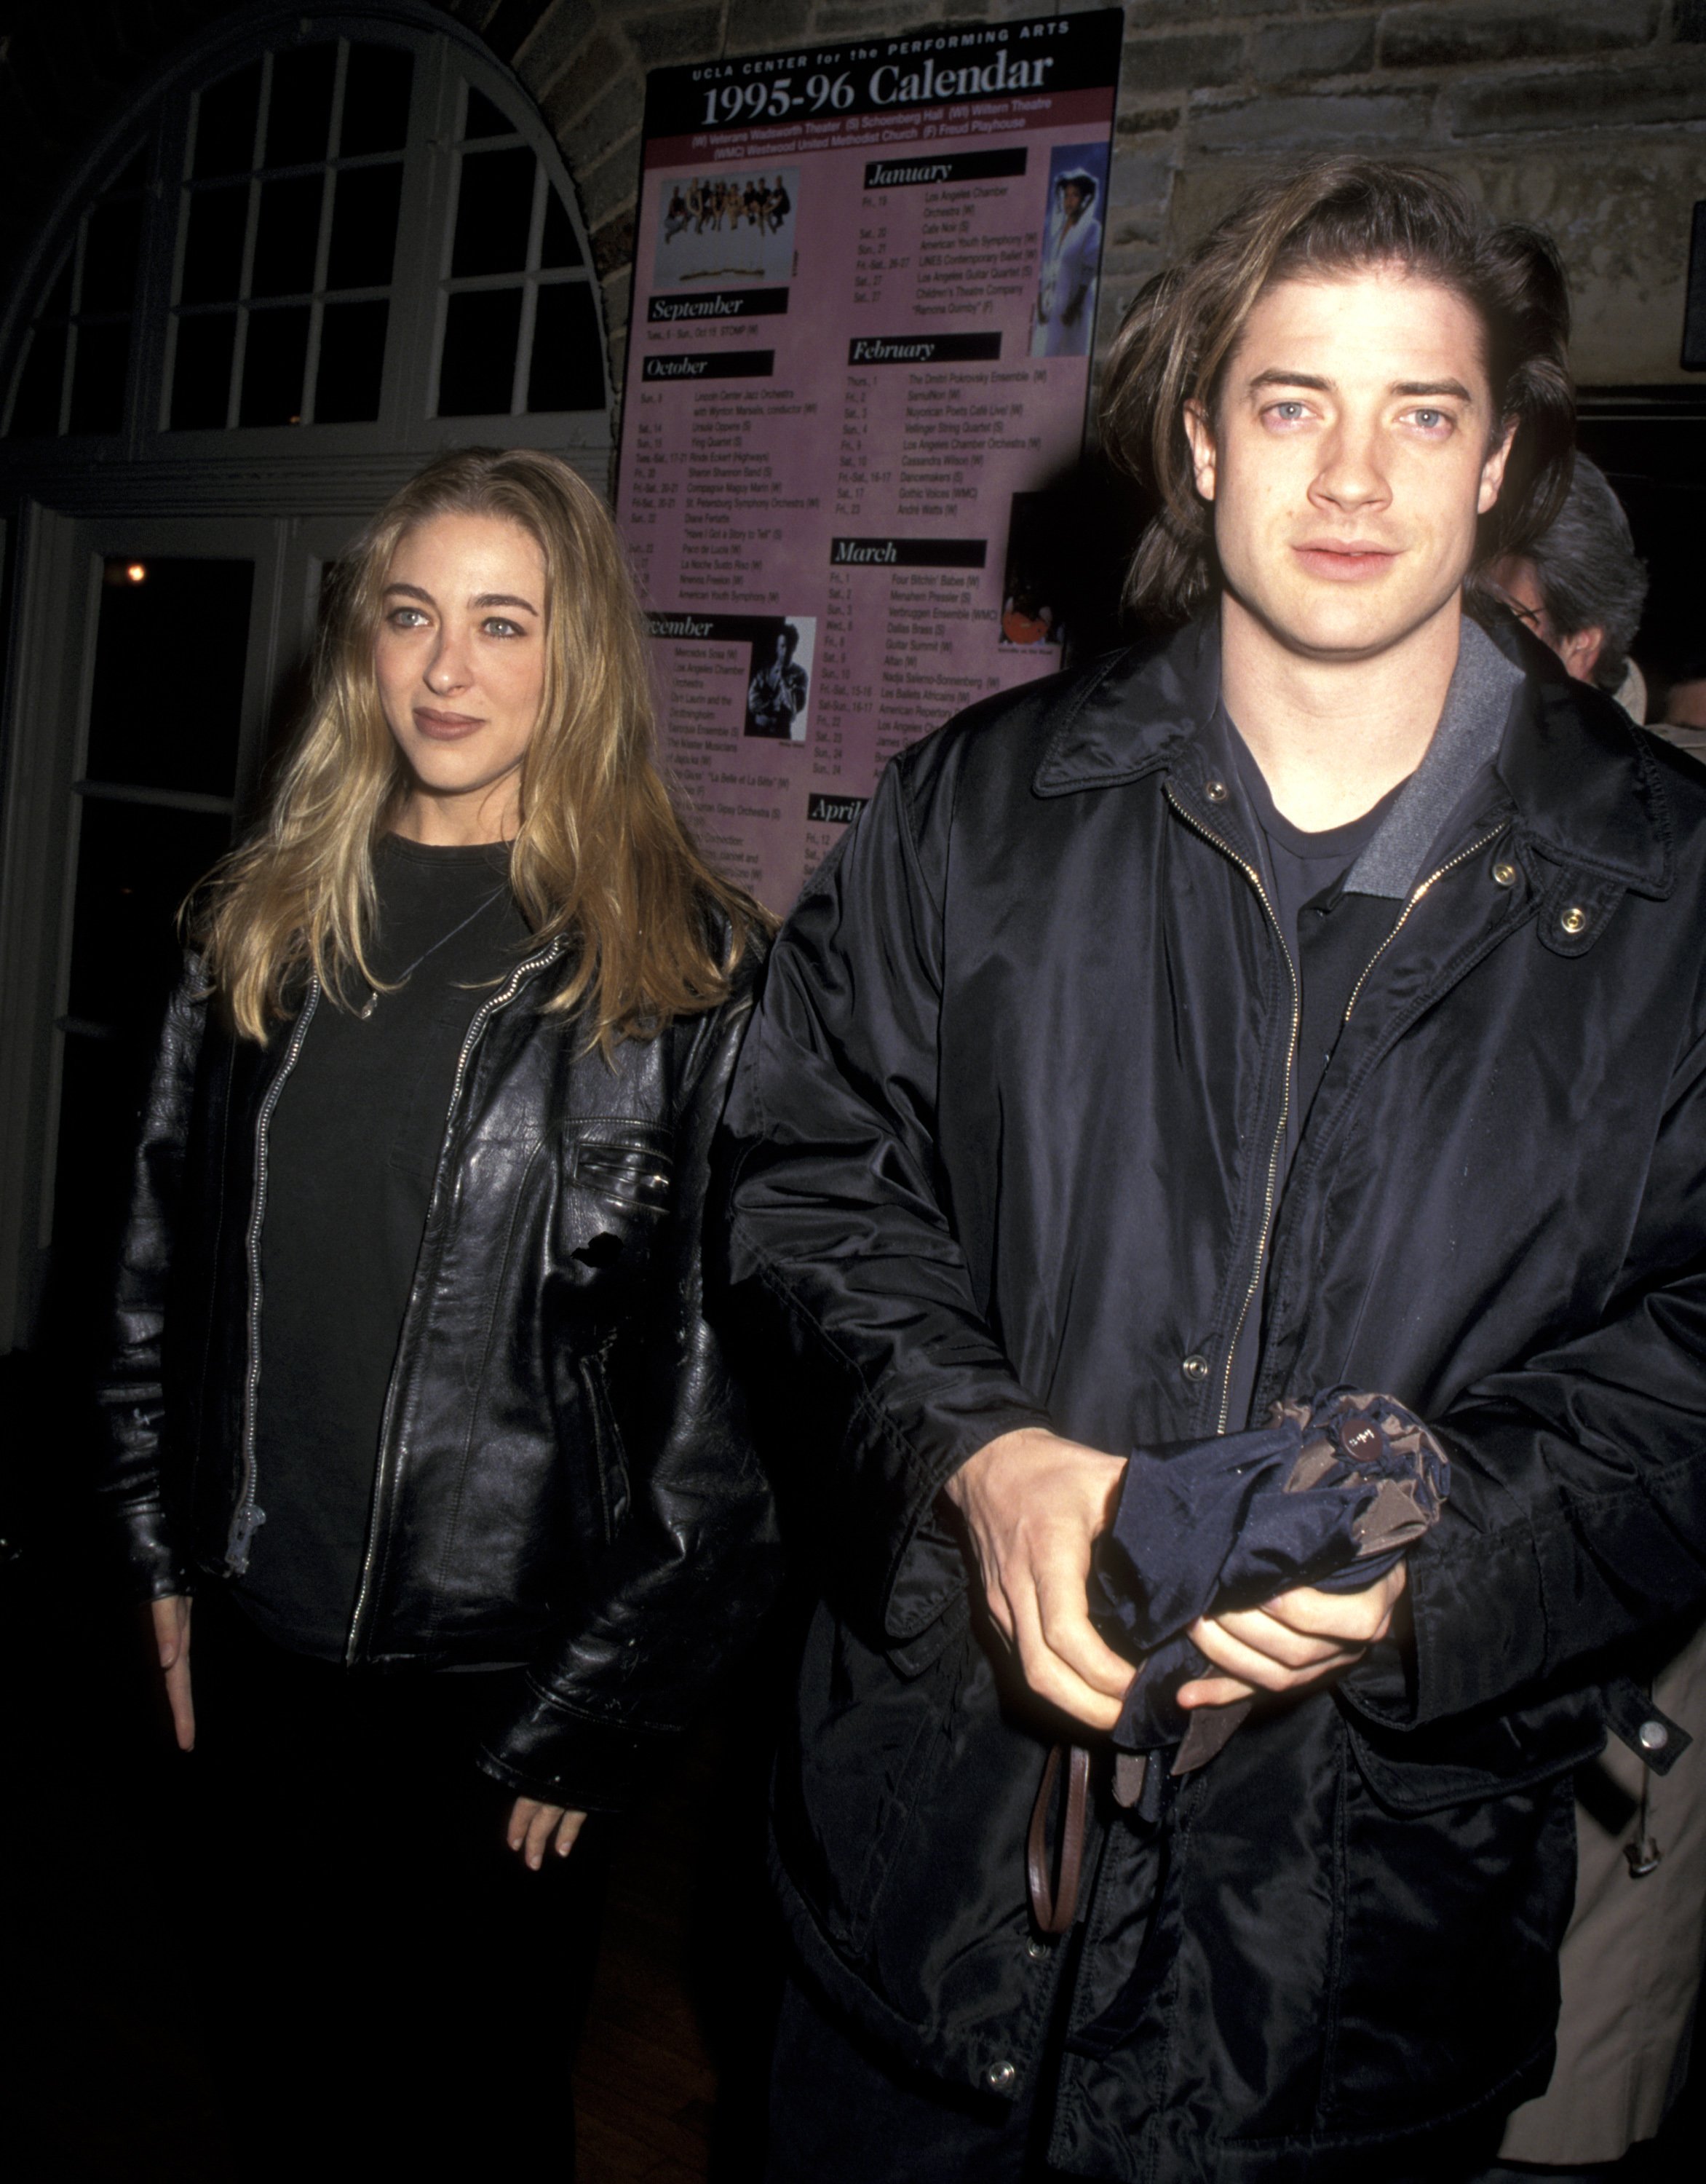 Brendan Fraser and actress Afton Smith during "Jack: A Night on The Town" Westwood Opening Night at Geffen Theater on March 13, 1996 in Westwood, California┃Source: Getty Images